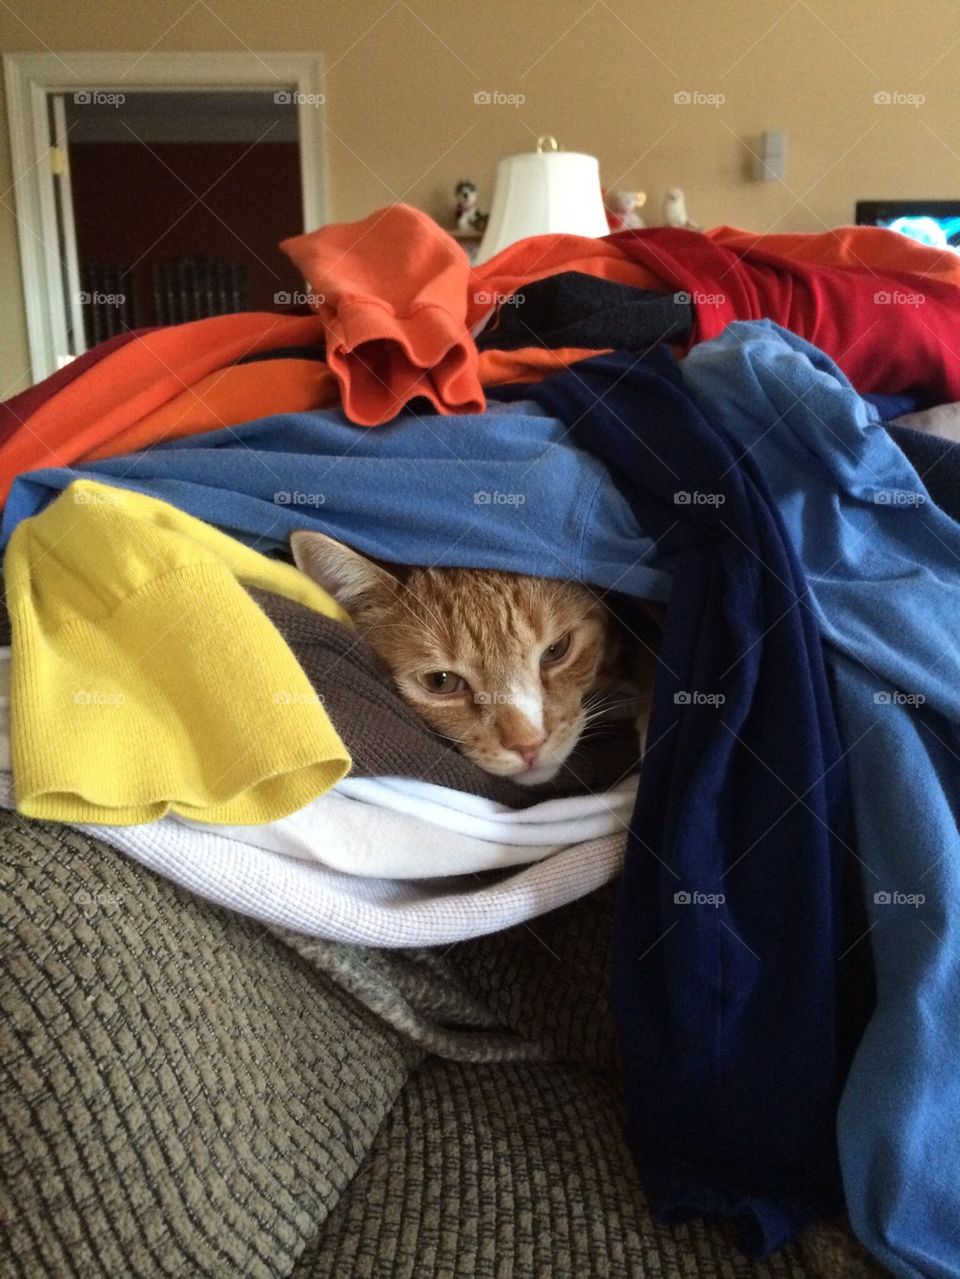 Hemi helps with the laundry